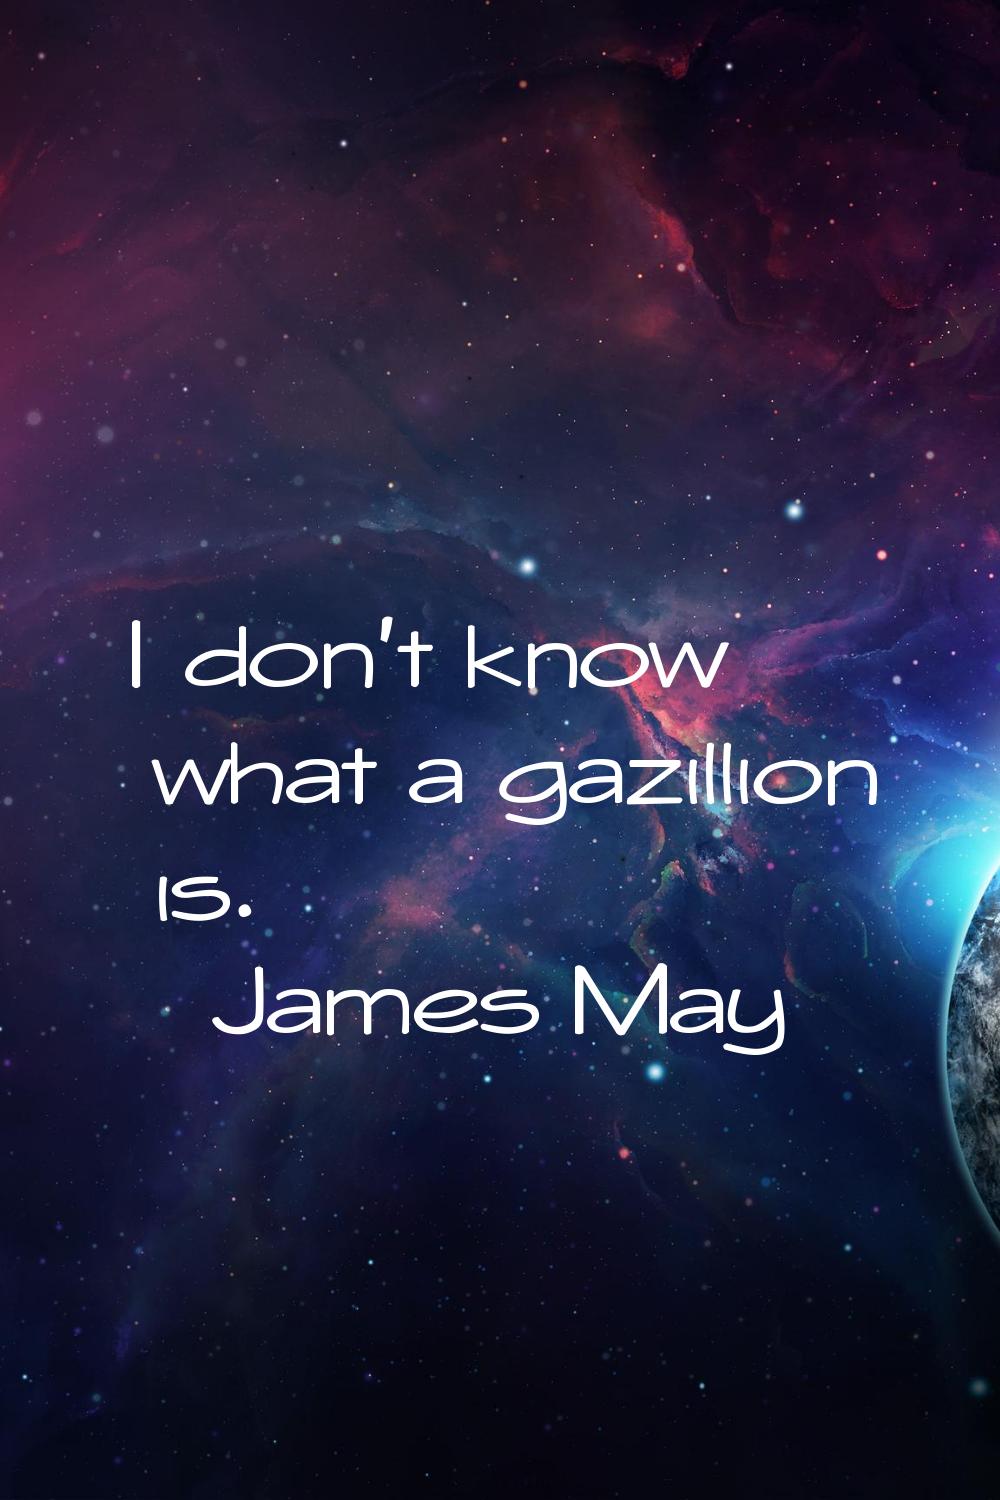 I don't know what a gazillion is.